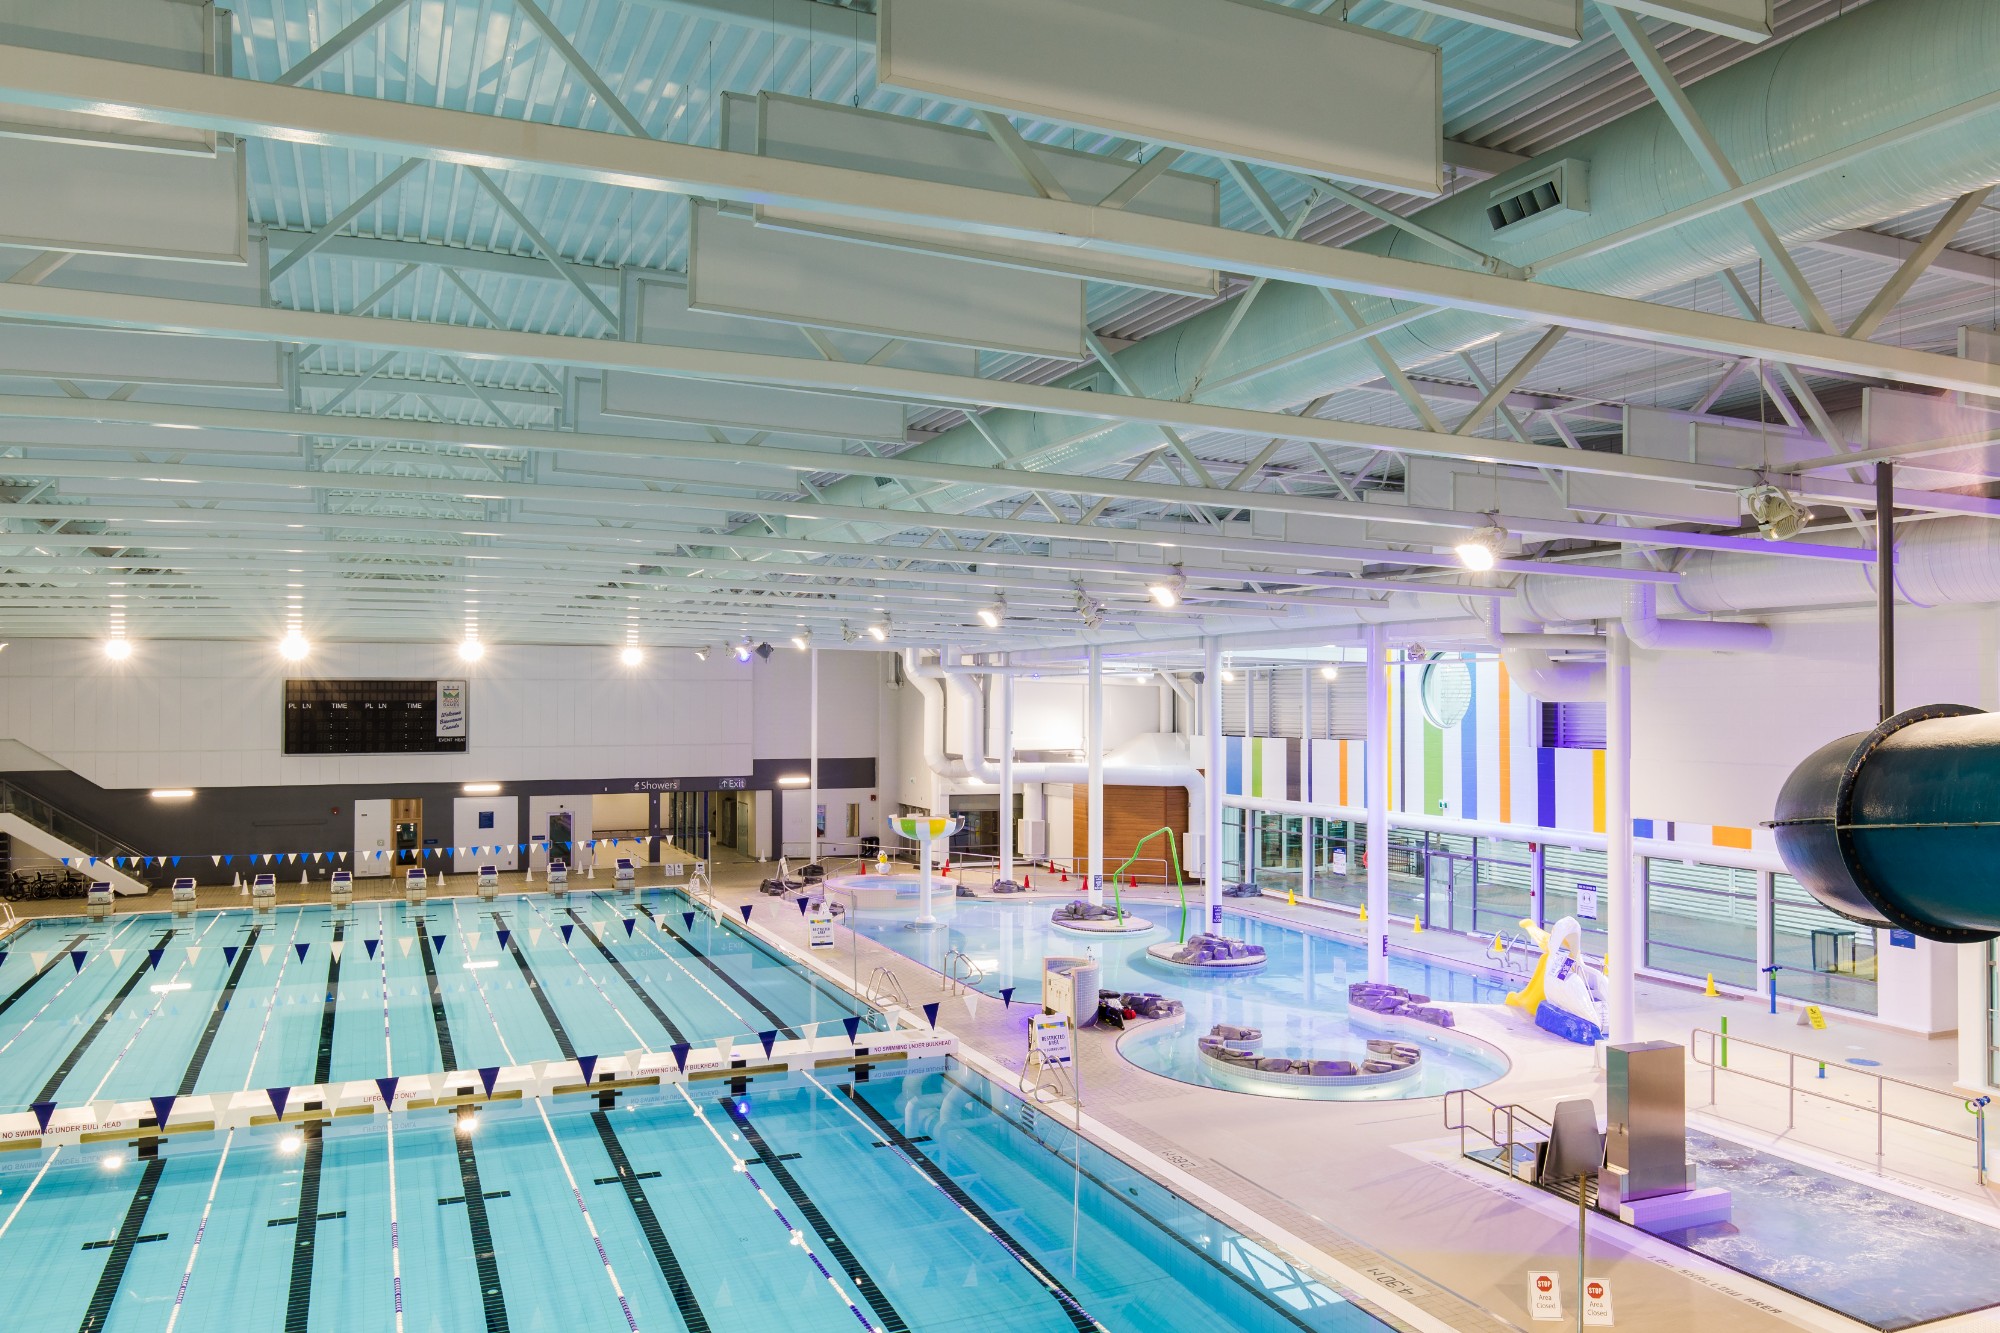 A photo of a large swimming pool with multiple lanes and bright purple lights.